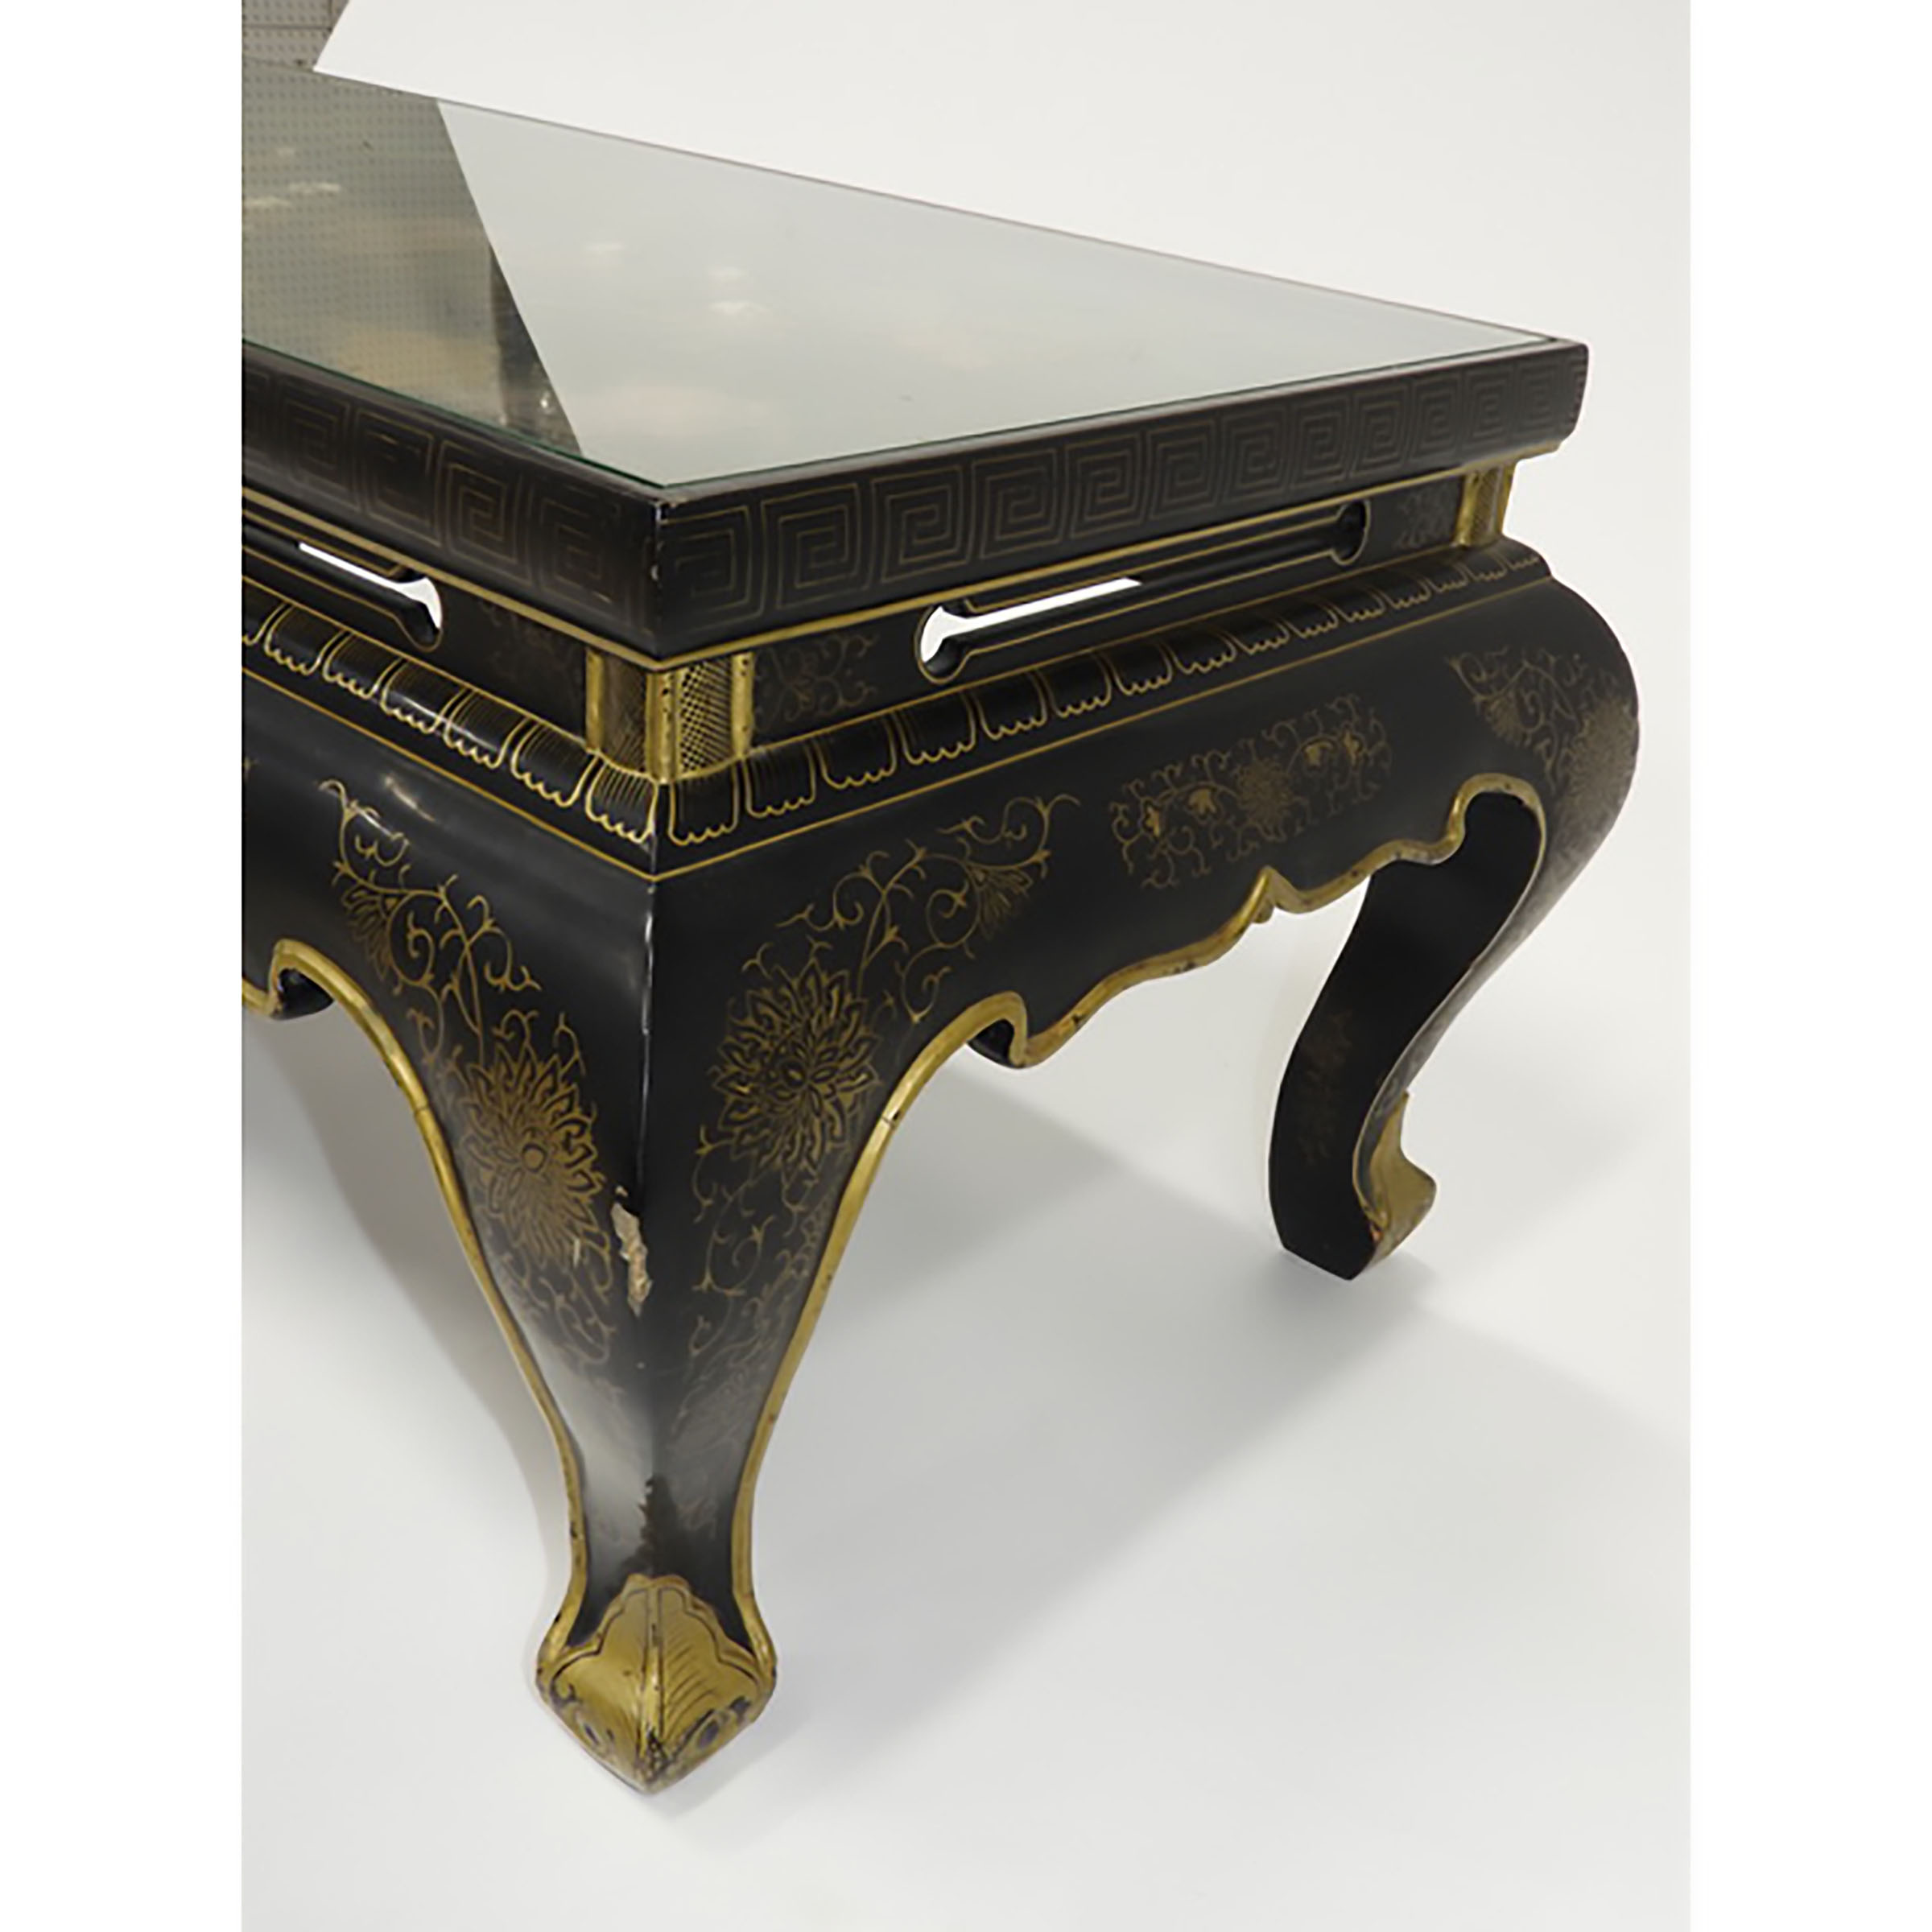 A Chinese Gilded and Lacquered Coffee Table With Glass Top, Early to Mid 20th Century, 民国 描金黑漆人物纹桌, - Image 3 of 6